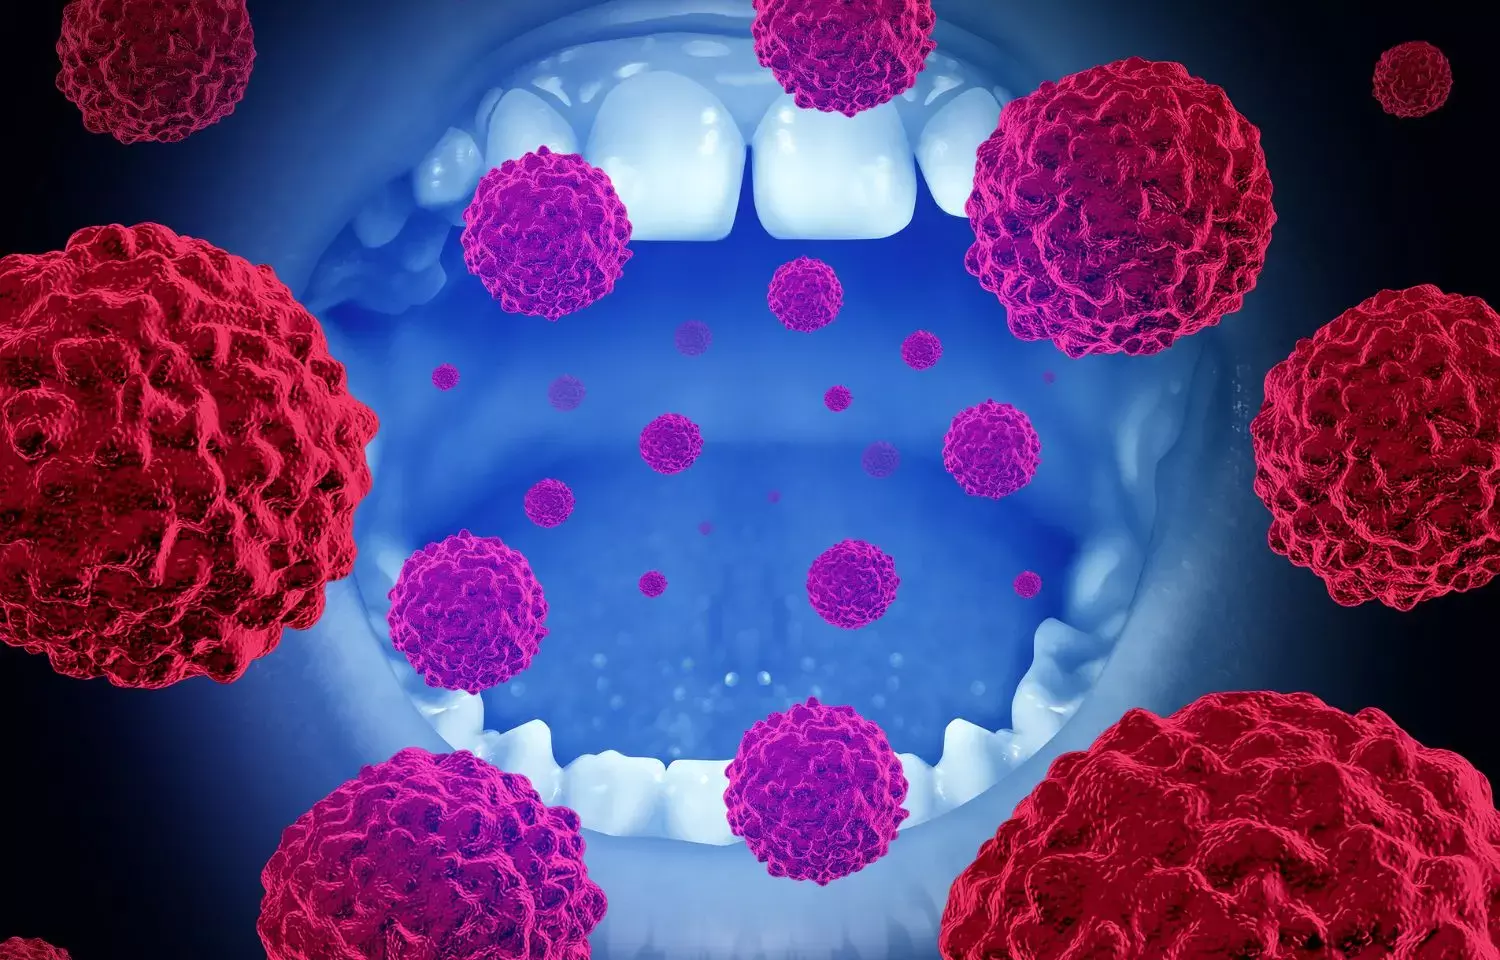 Preoperative Pembrolizumab may not increase complications during or after oral cavity cancer surgery